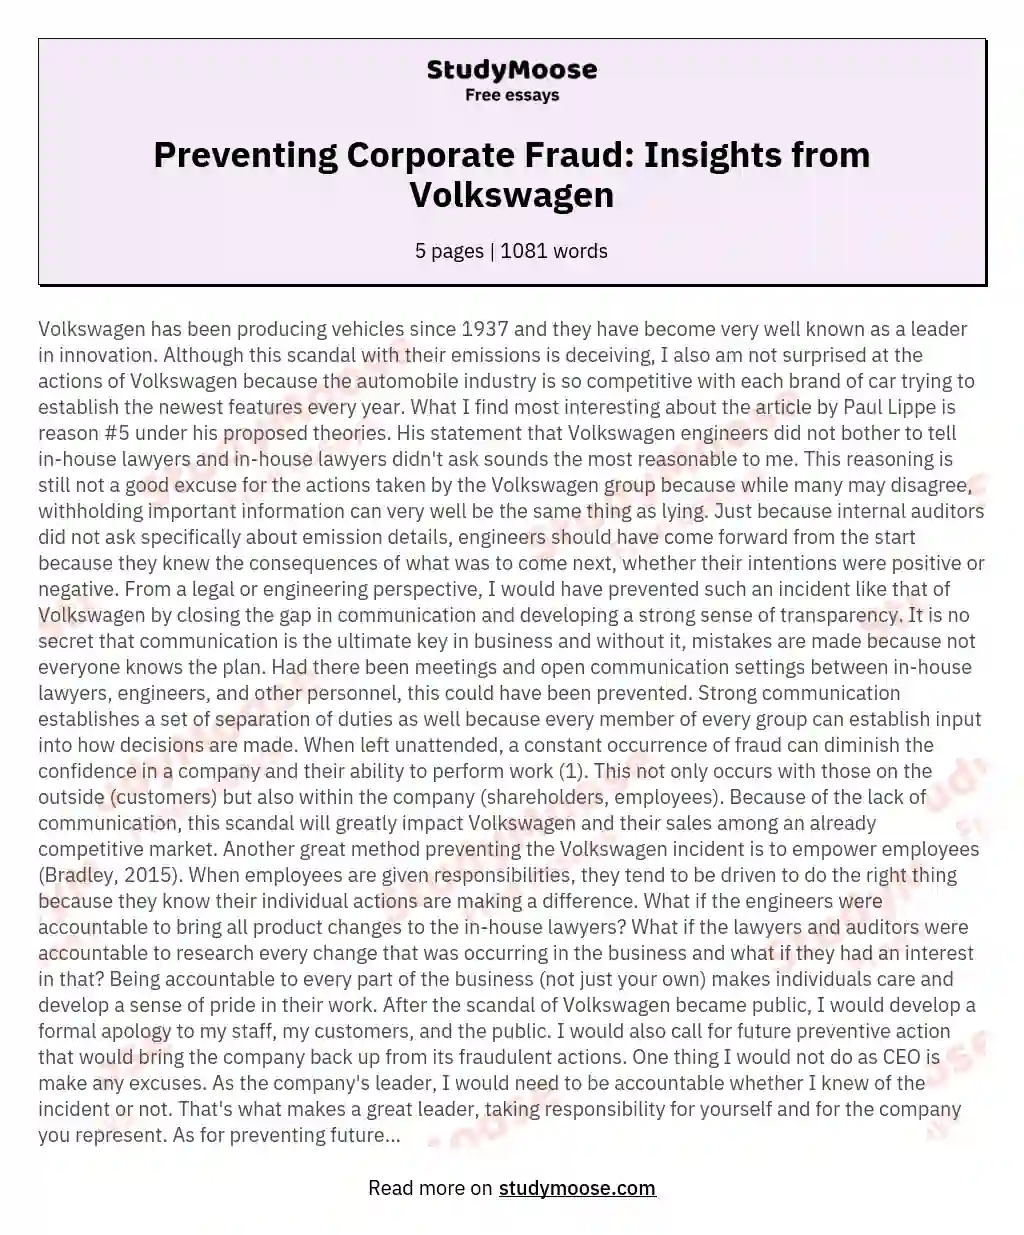 Preventing Corporate Fraud: Insights from Volkswagen essay